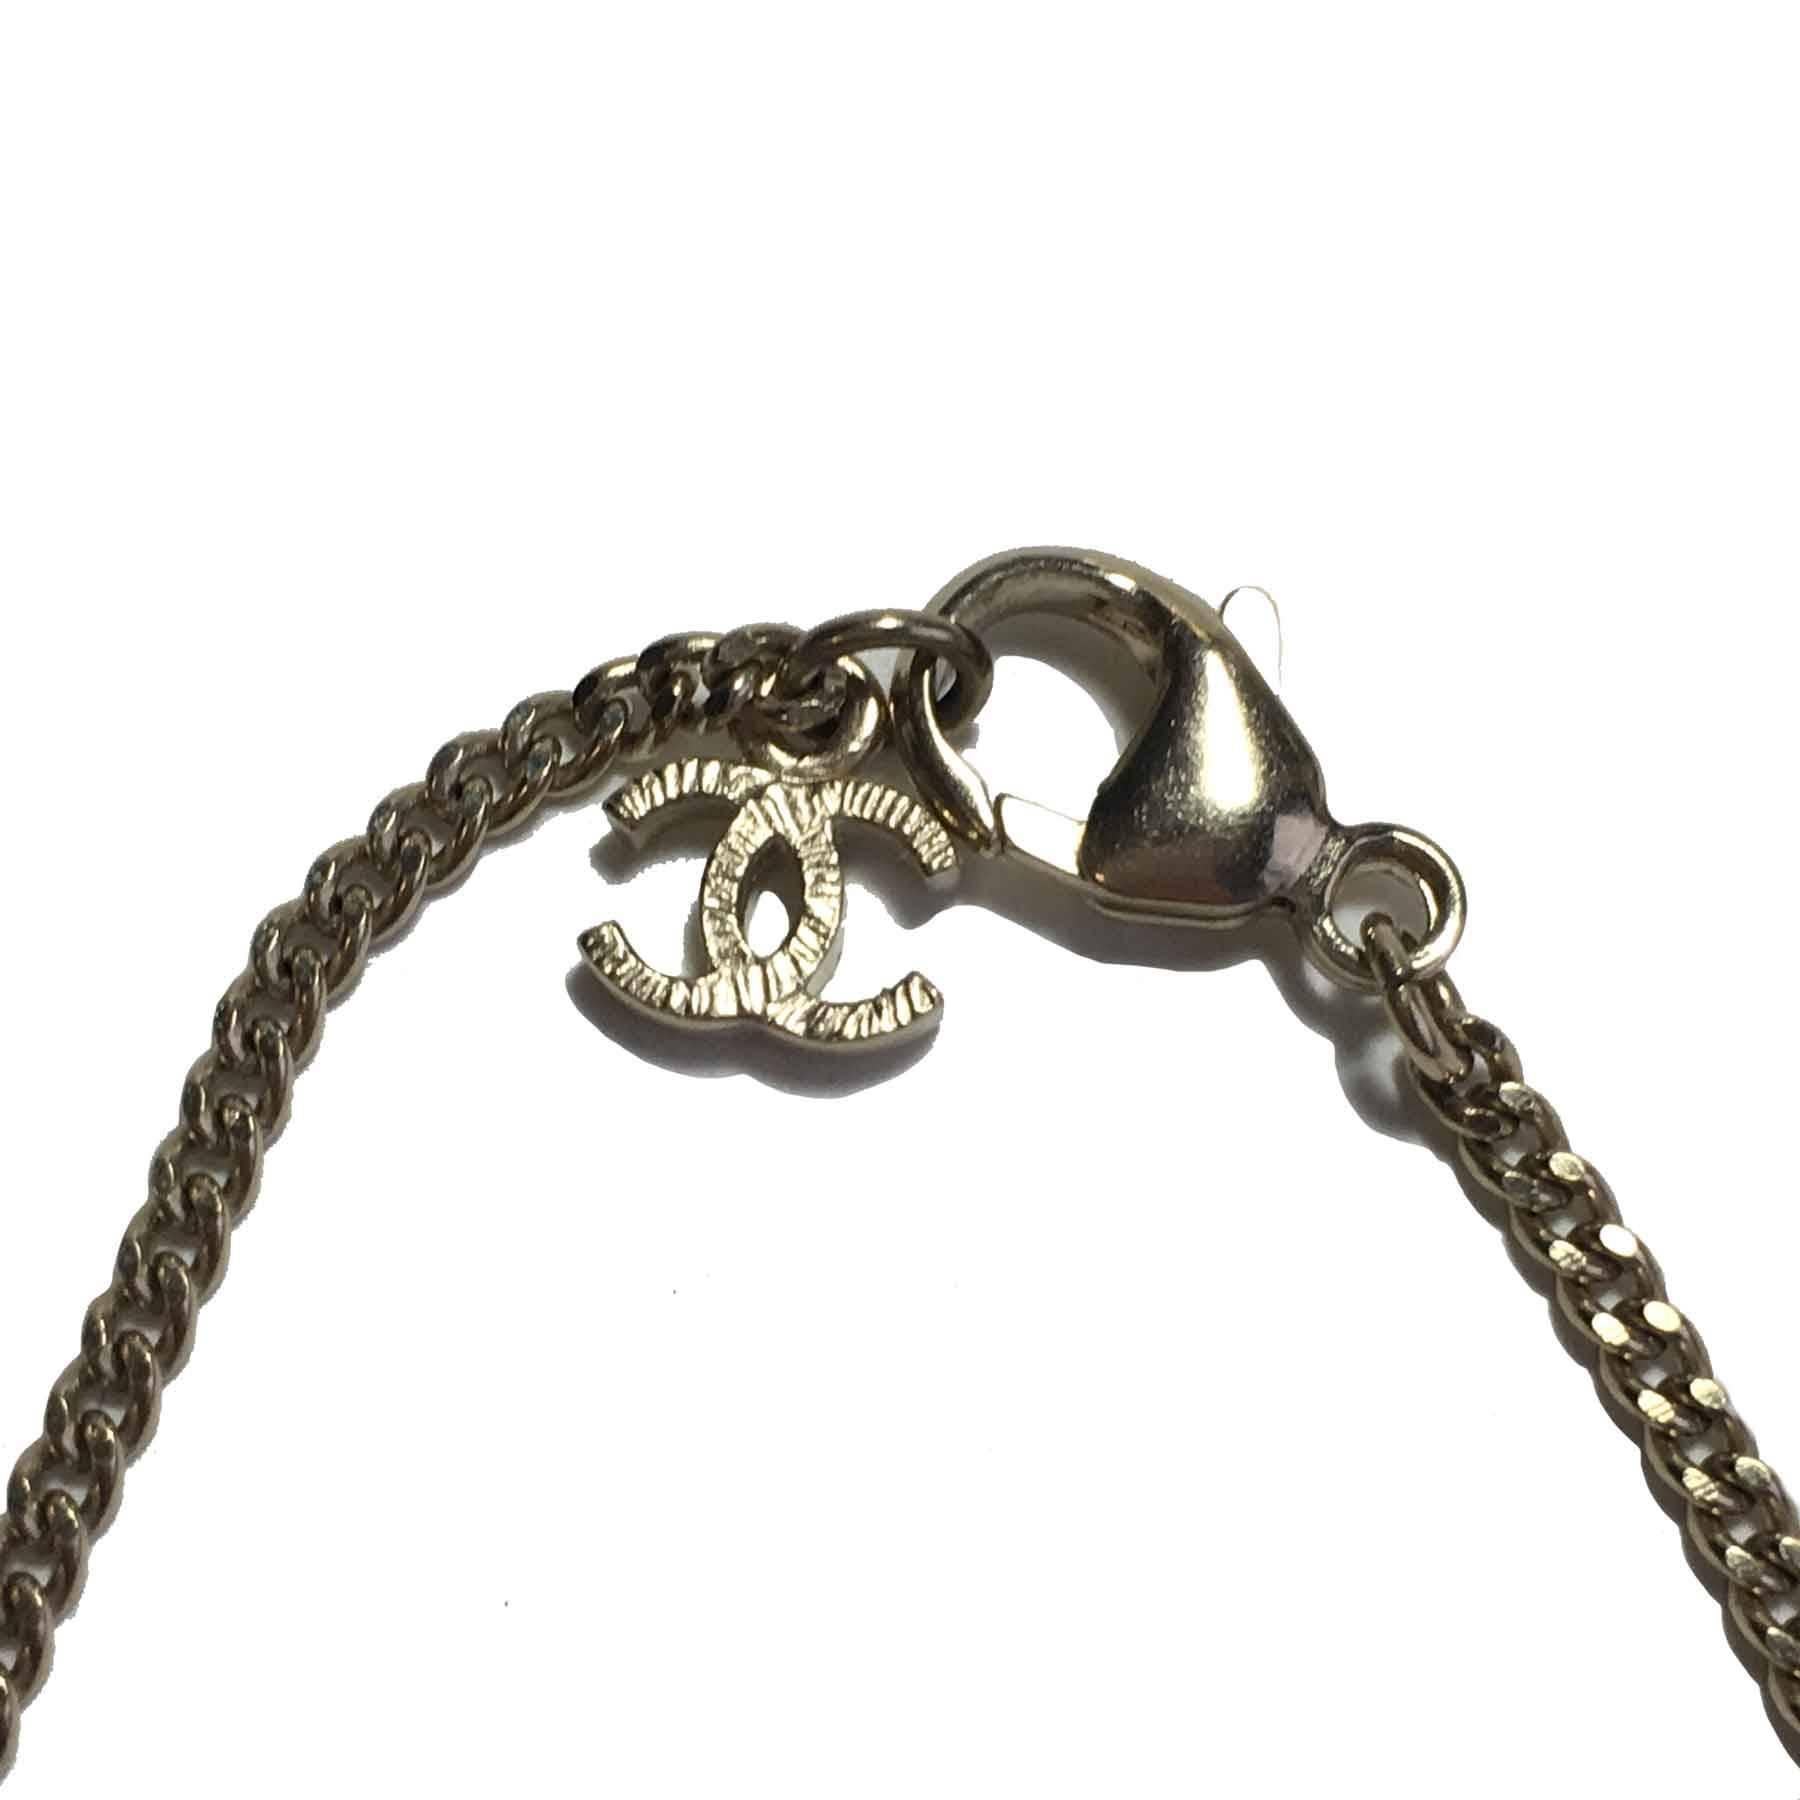 CHANEL Pendant Necklace in Gilded Metal and Pearl with Graffiti Effect 2